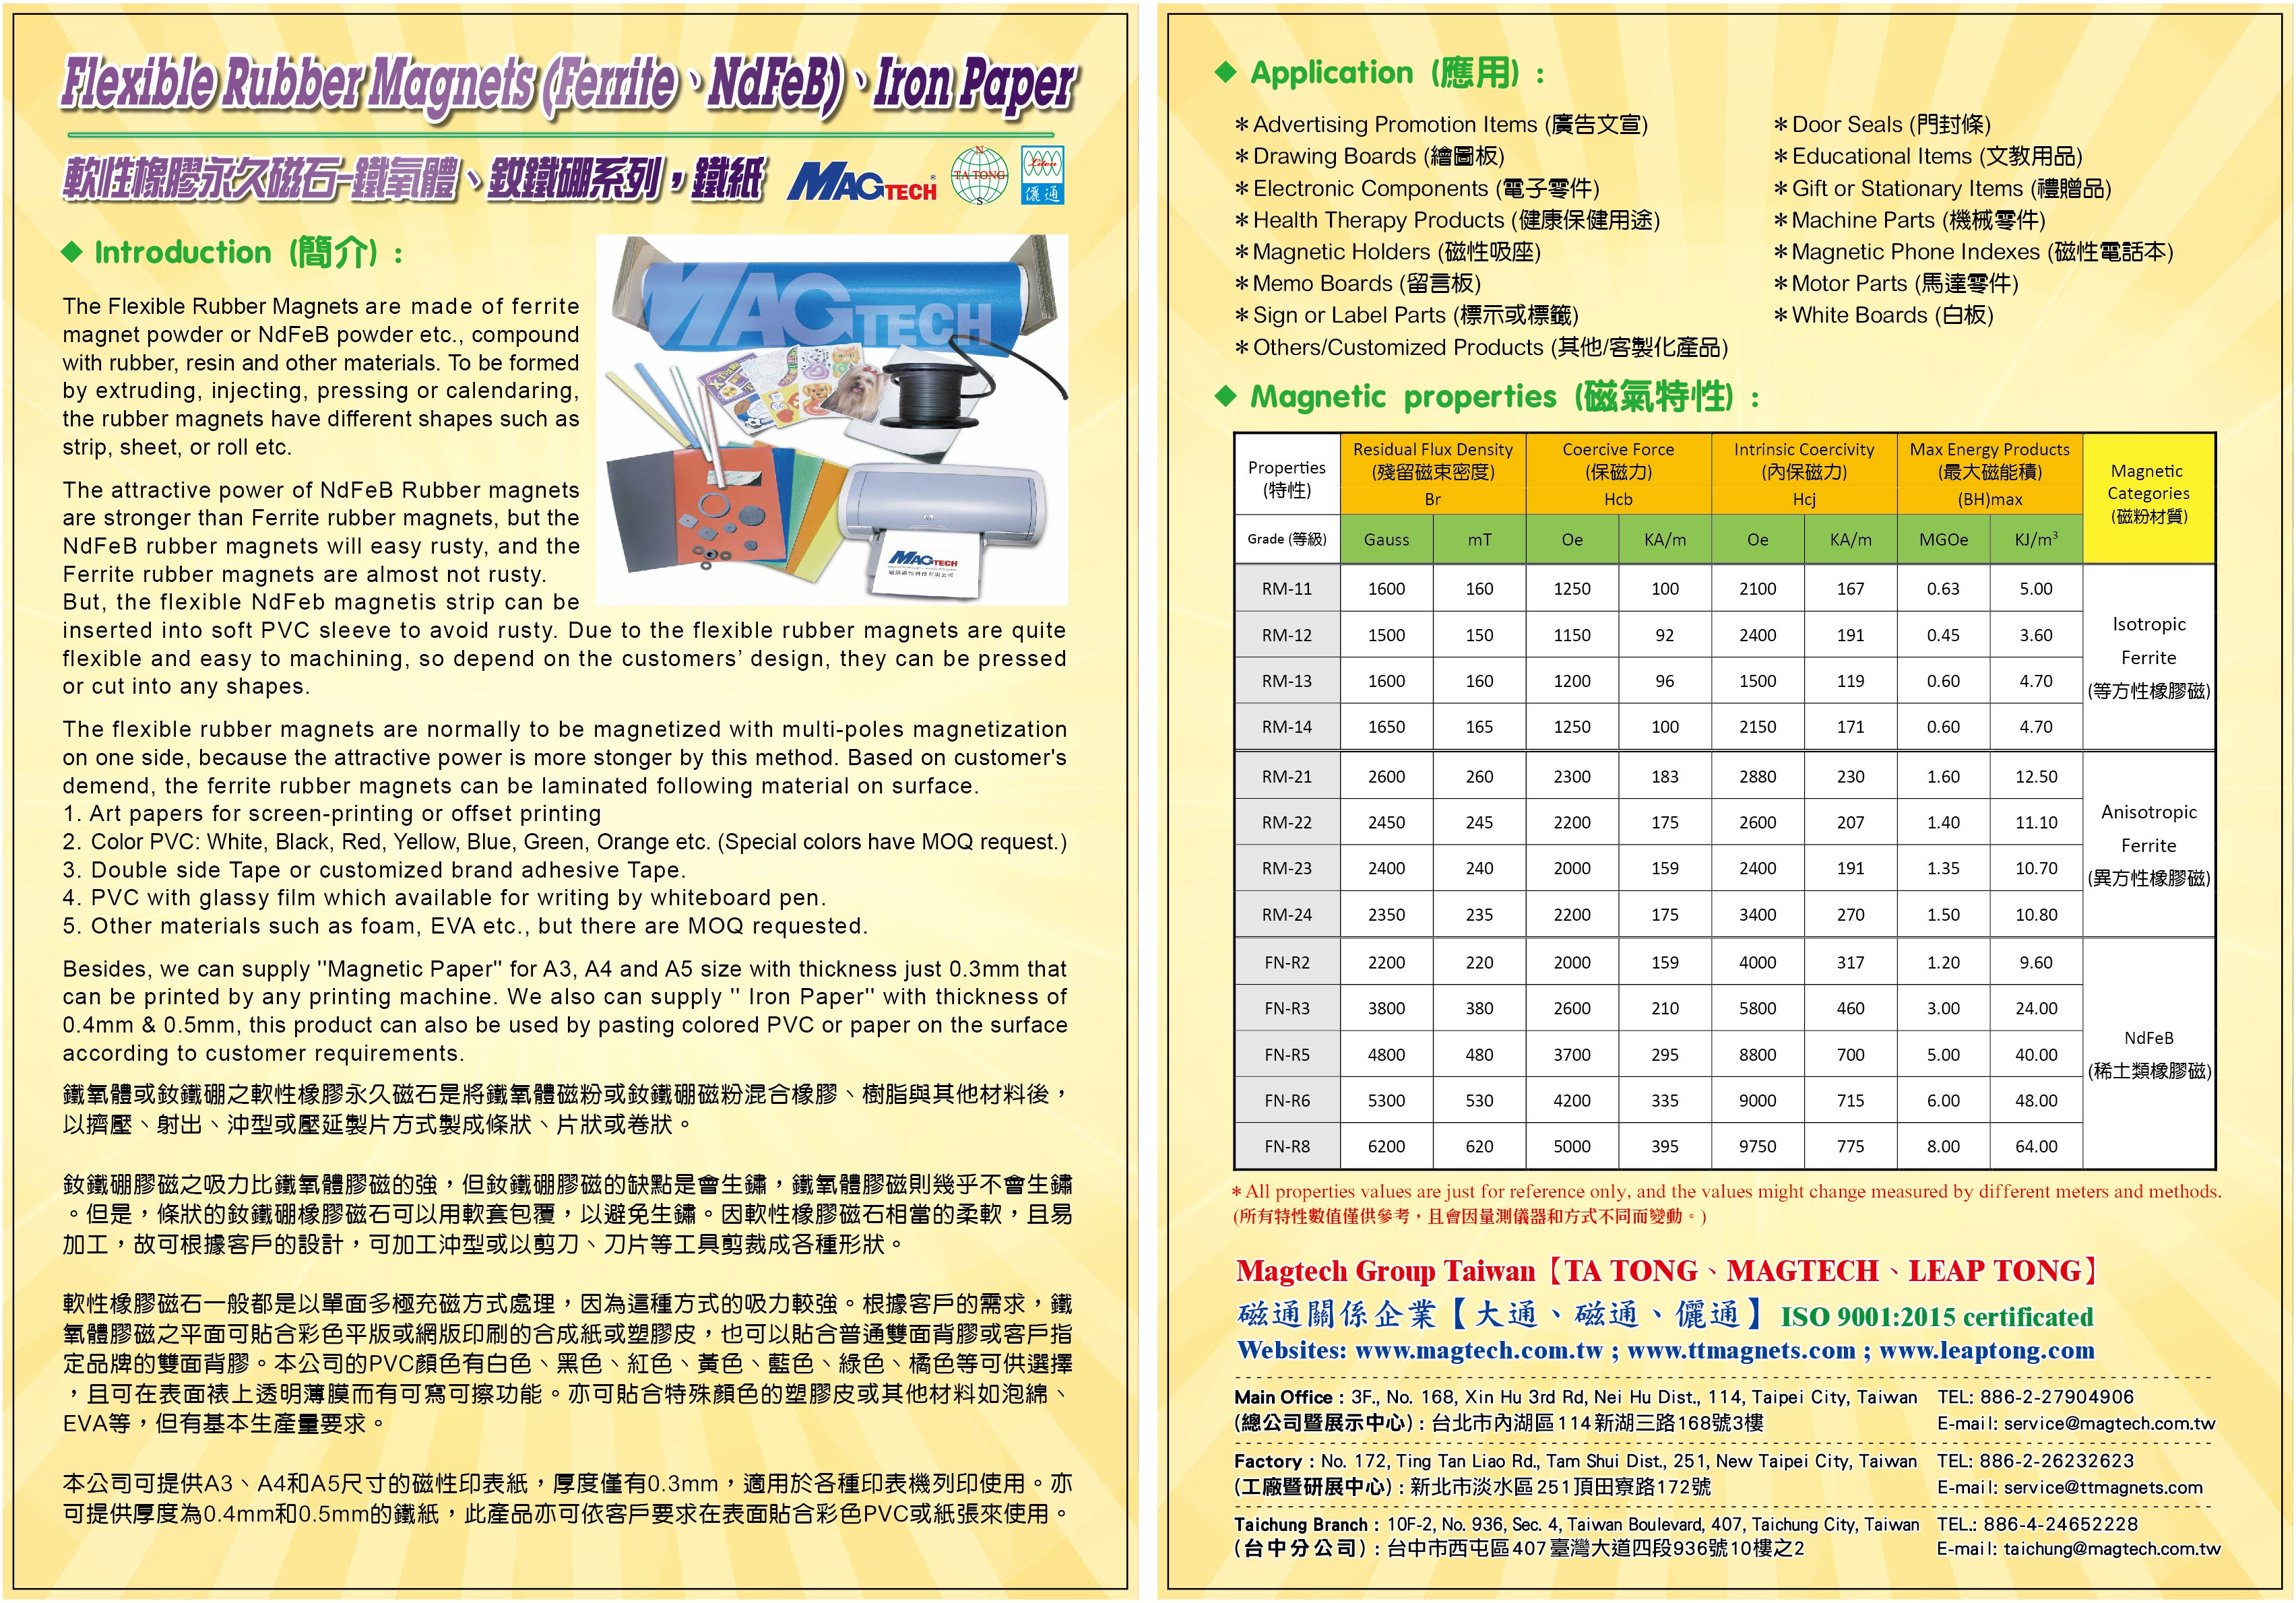 MAGTECH MAGNETIC PRODUCTS CORP. (LEAP TONG)_Online Catalogues